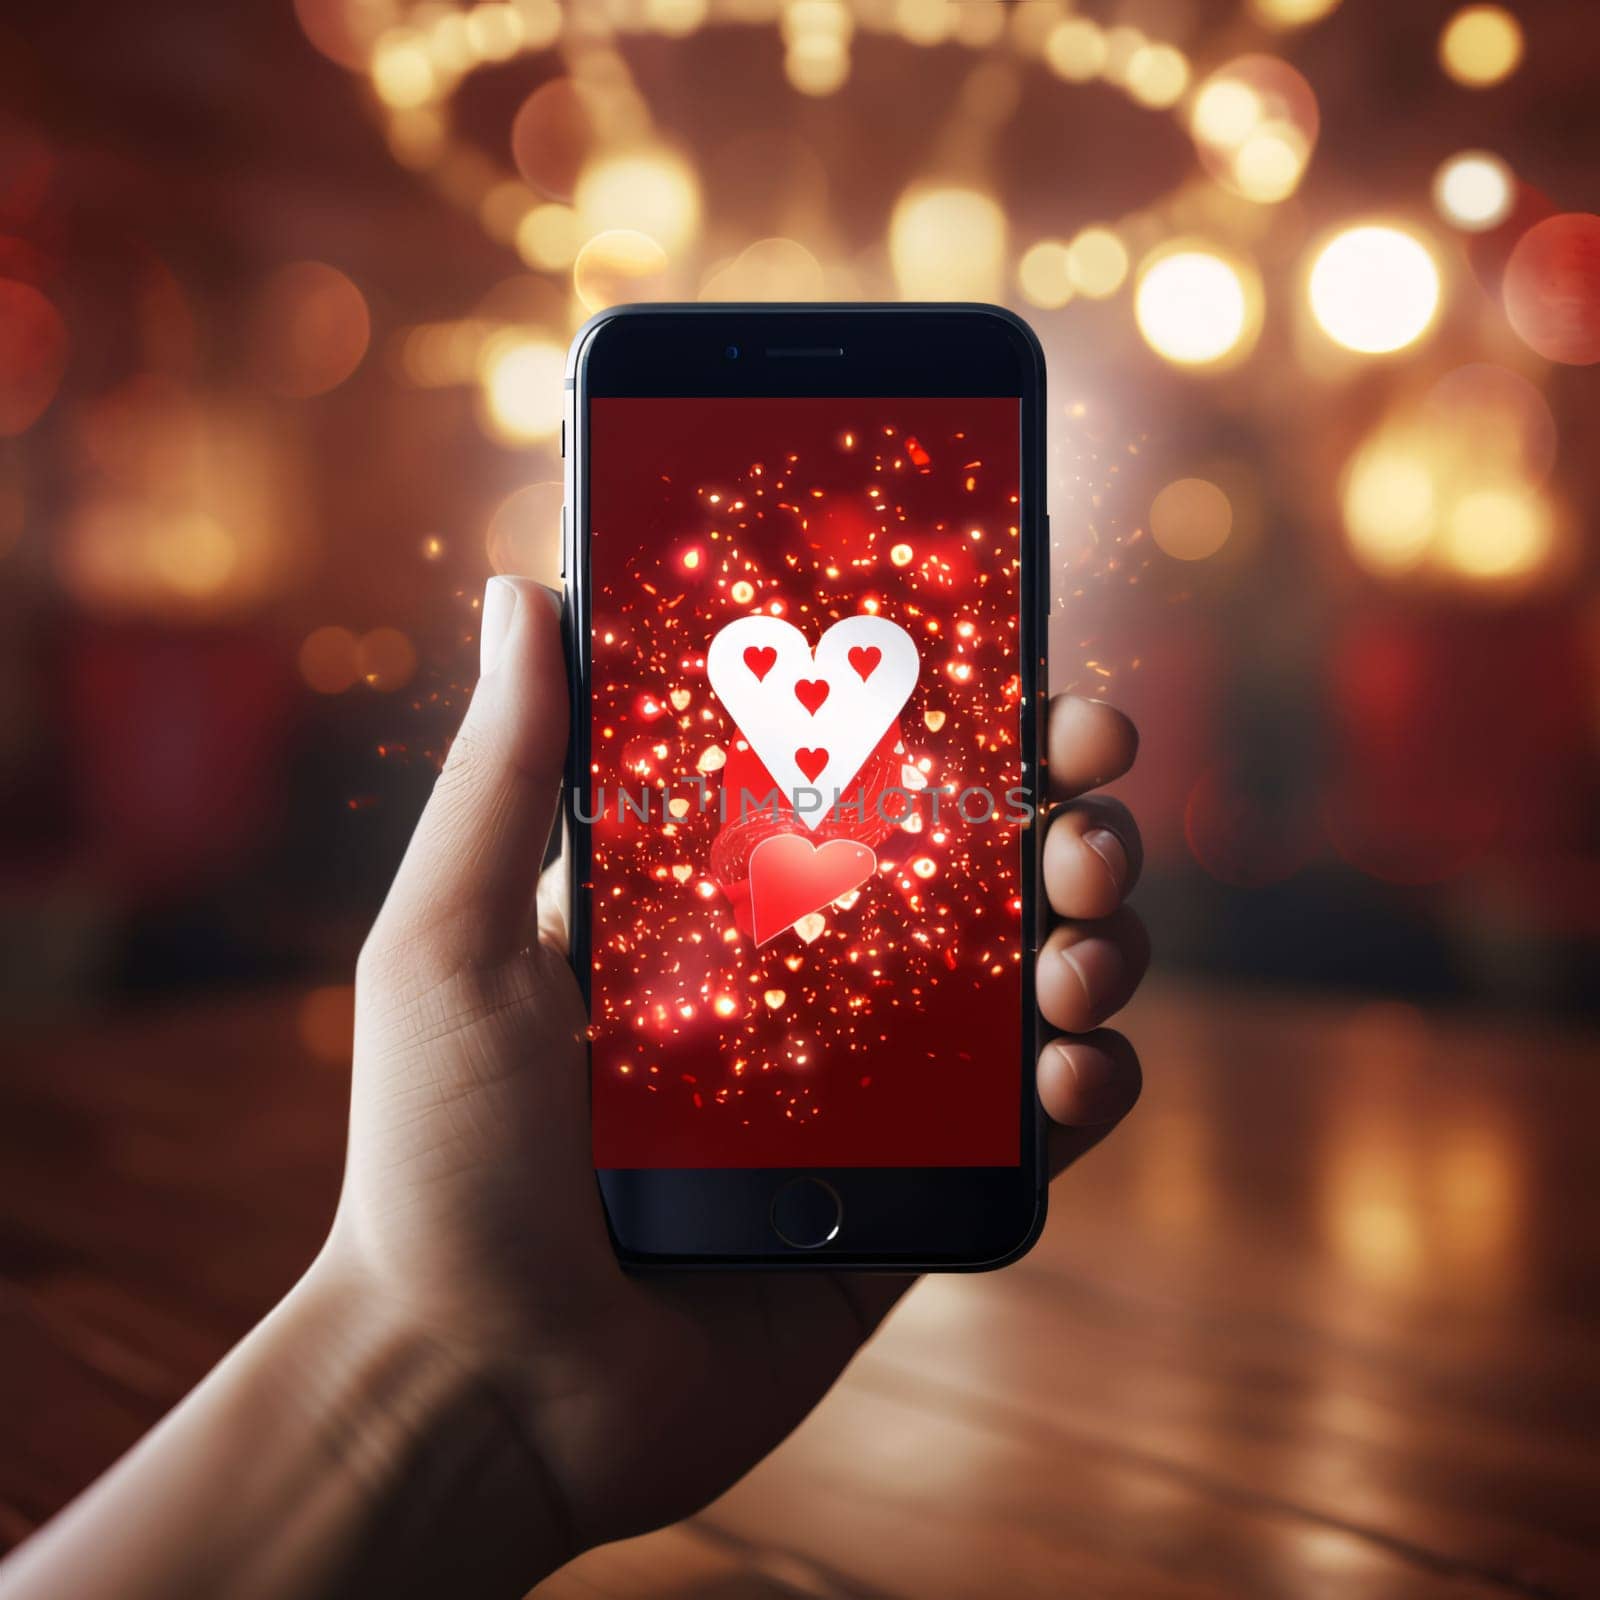 Smartphone screen: female hand holding a smart phone with a red heart on the screen